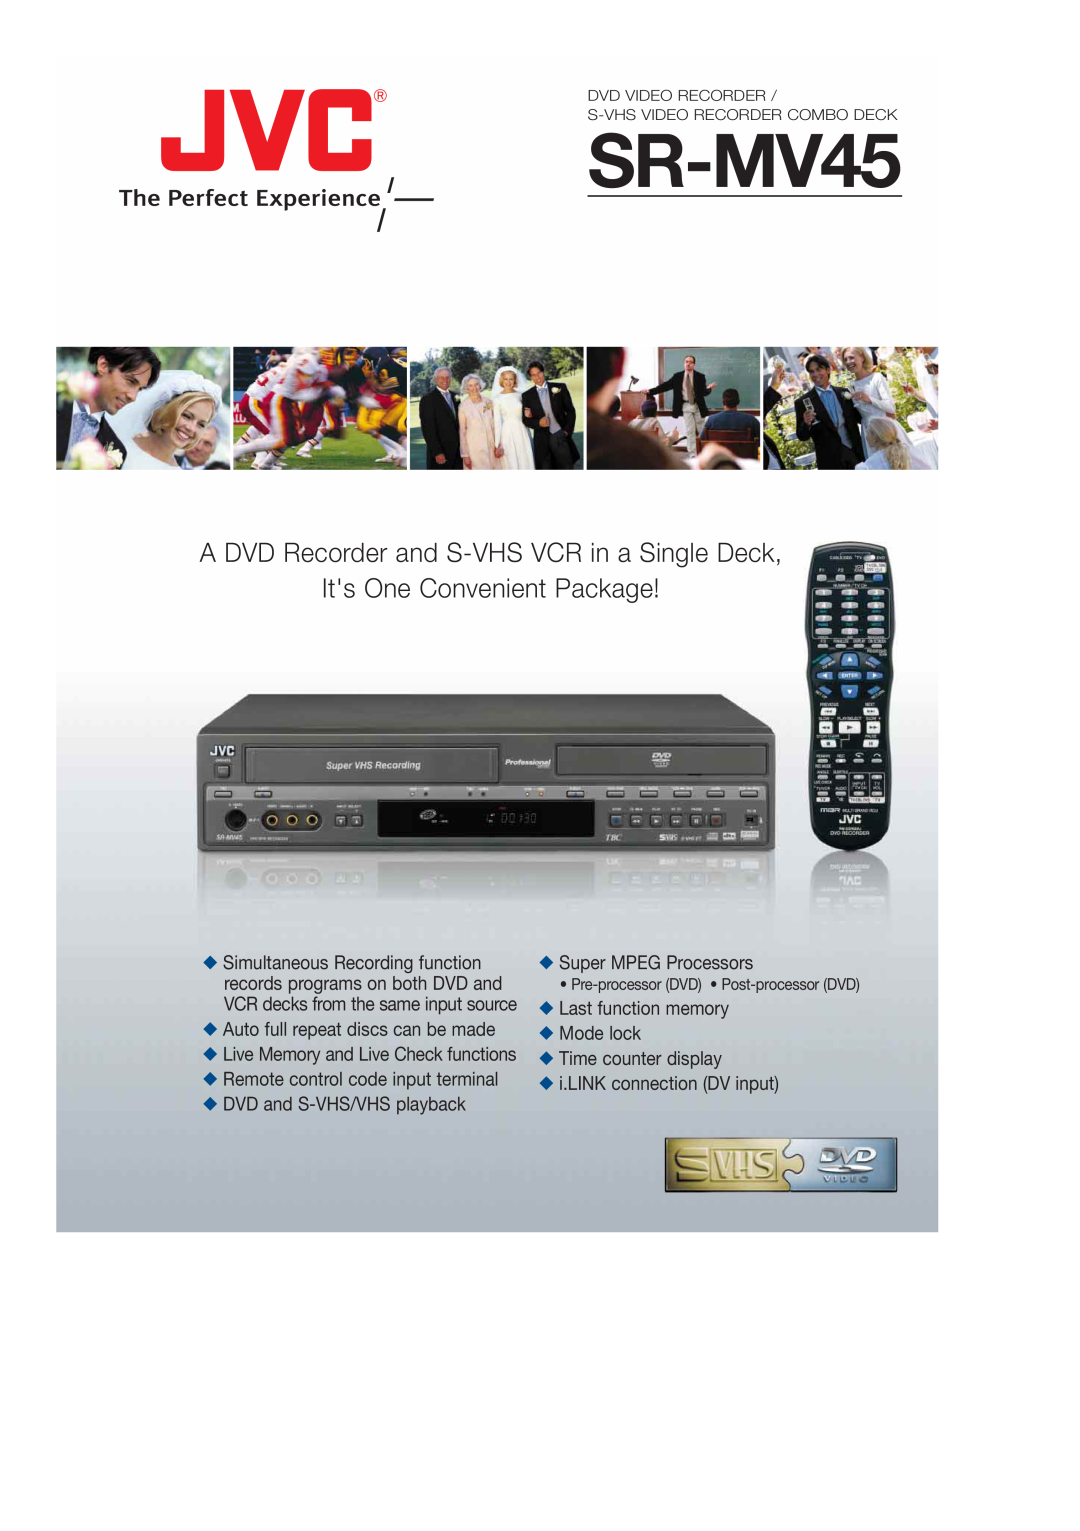 JVC SR-MV45 manual A DVD Recorder and S-VHS VCR in a Single Deck, Its One Convenient Package 